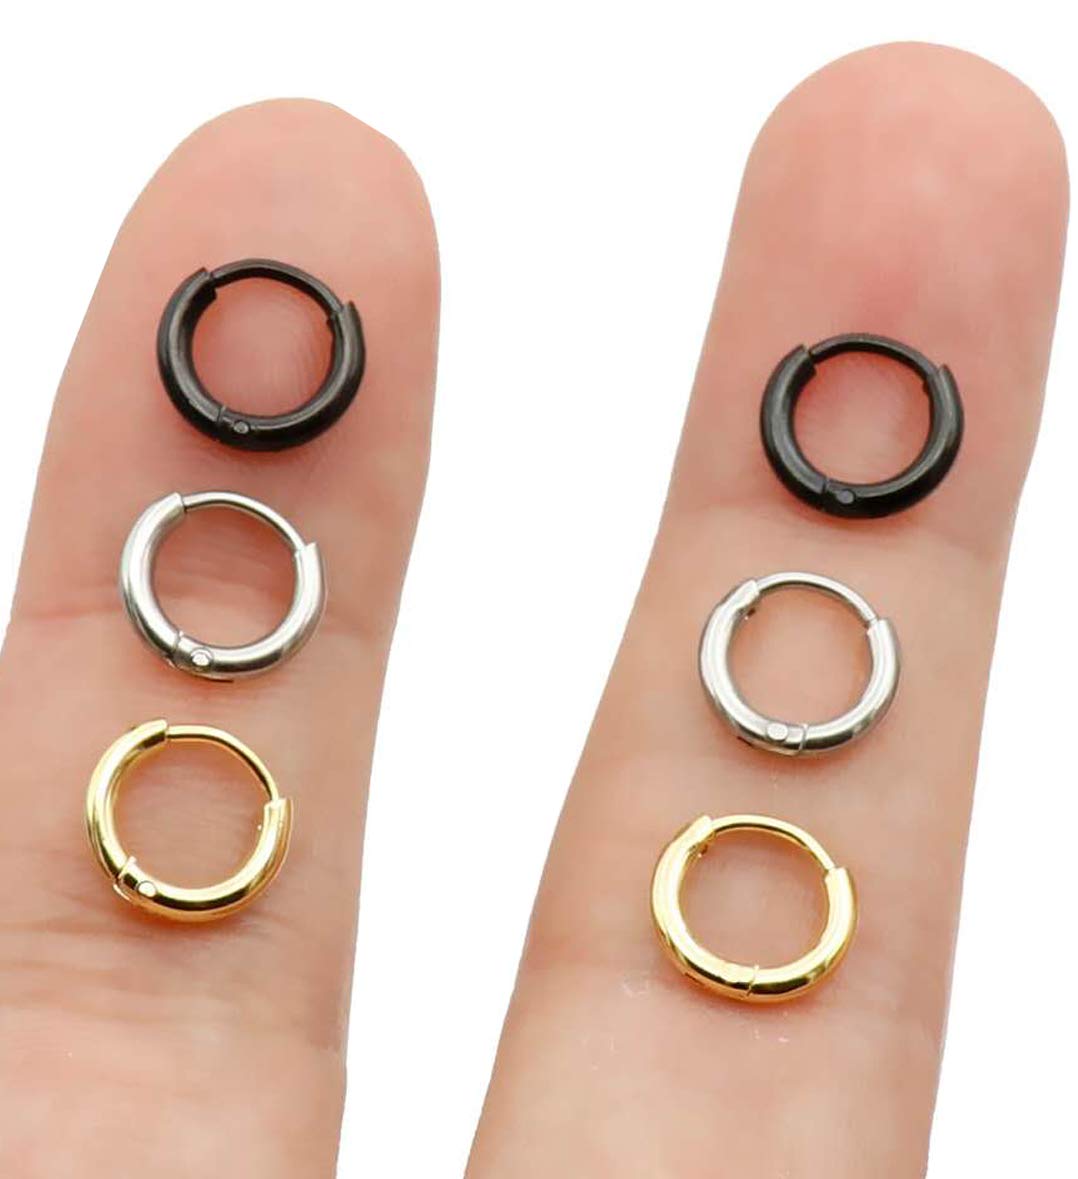 Unisex 18K Real Gold Plating Surgical Steel Sleeper Tiny Hoop Earrings,Nose Ring Septum Ring Helix Ring Daith Ring Lip Ring Nipple Ring Snug Ring Rook Ring Body Piercing Jewelry